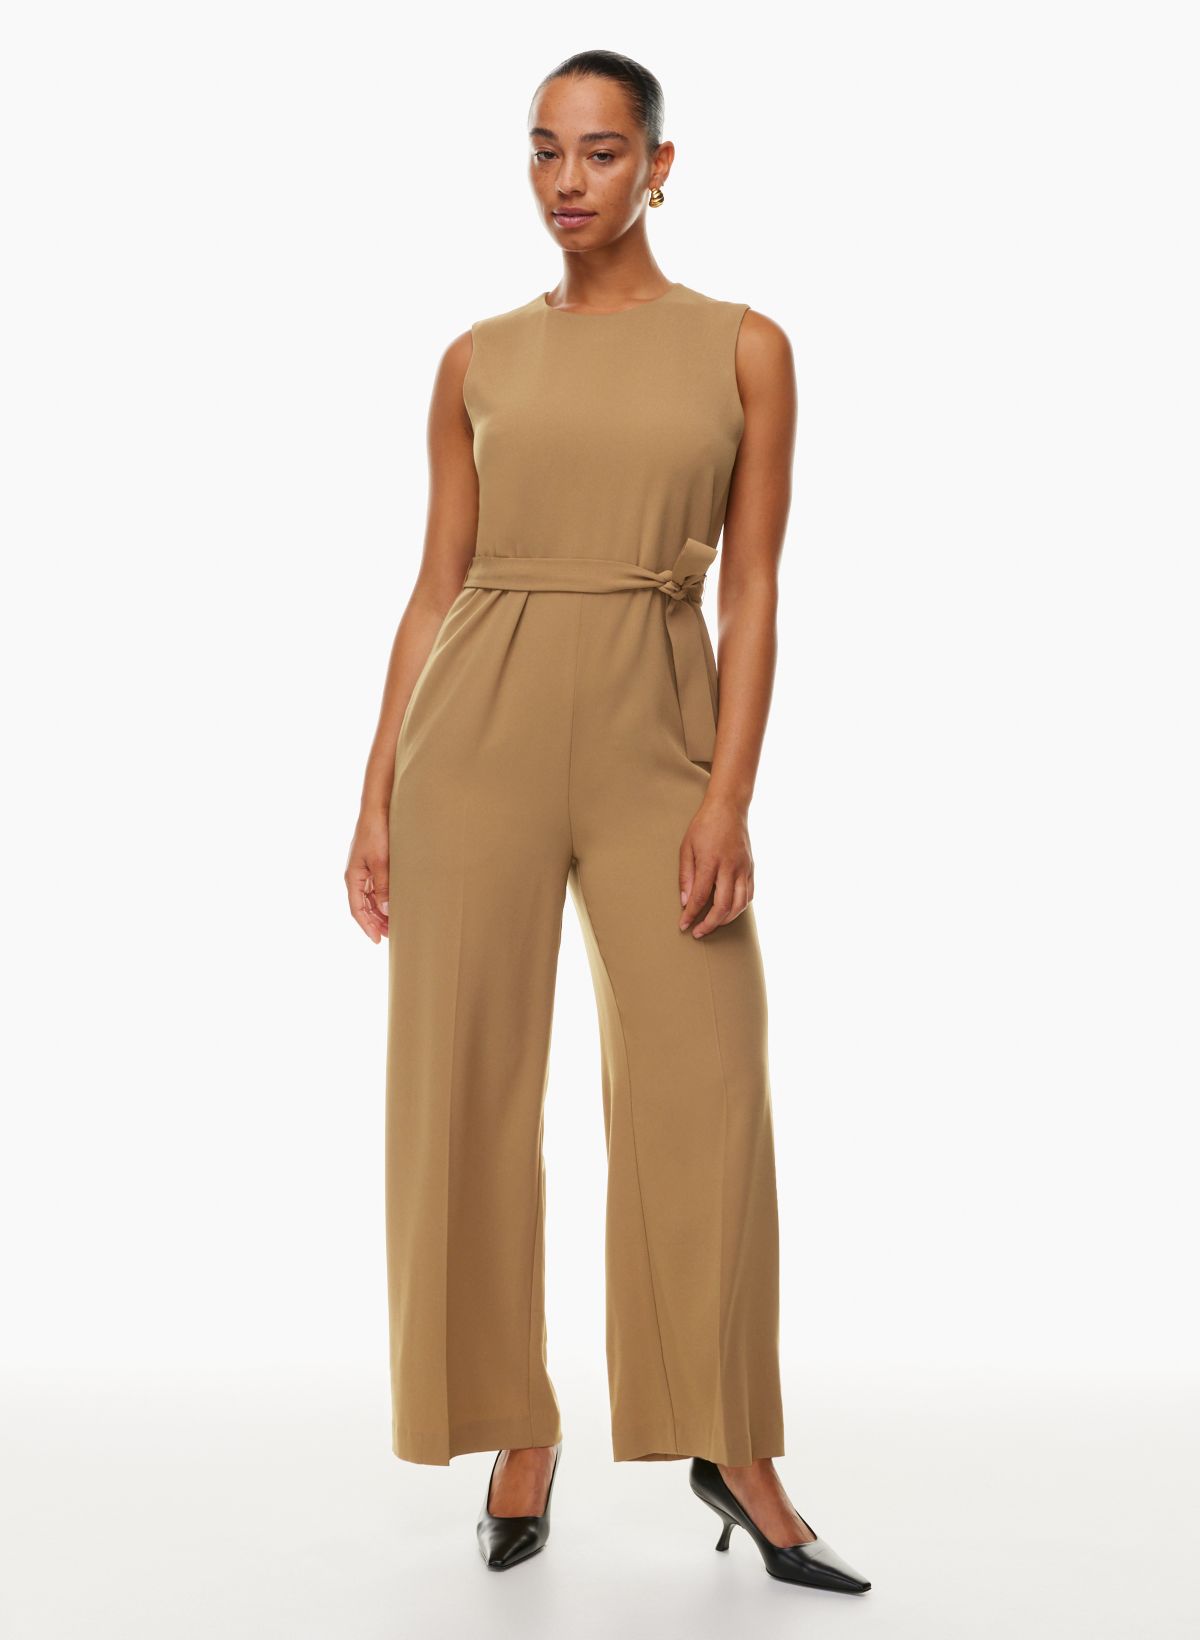 Jump into Style with Our Rompers and Jumpsuits - Beautifour – Shop